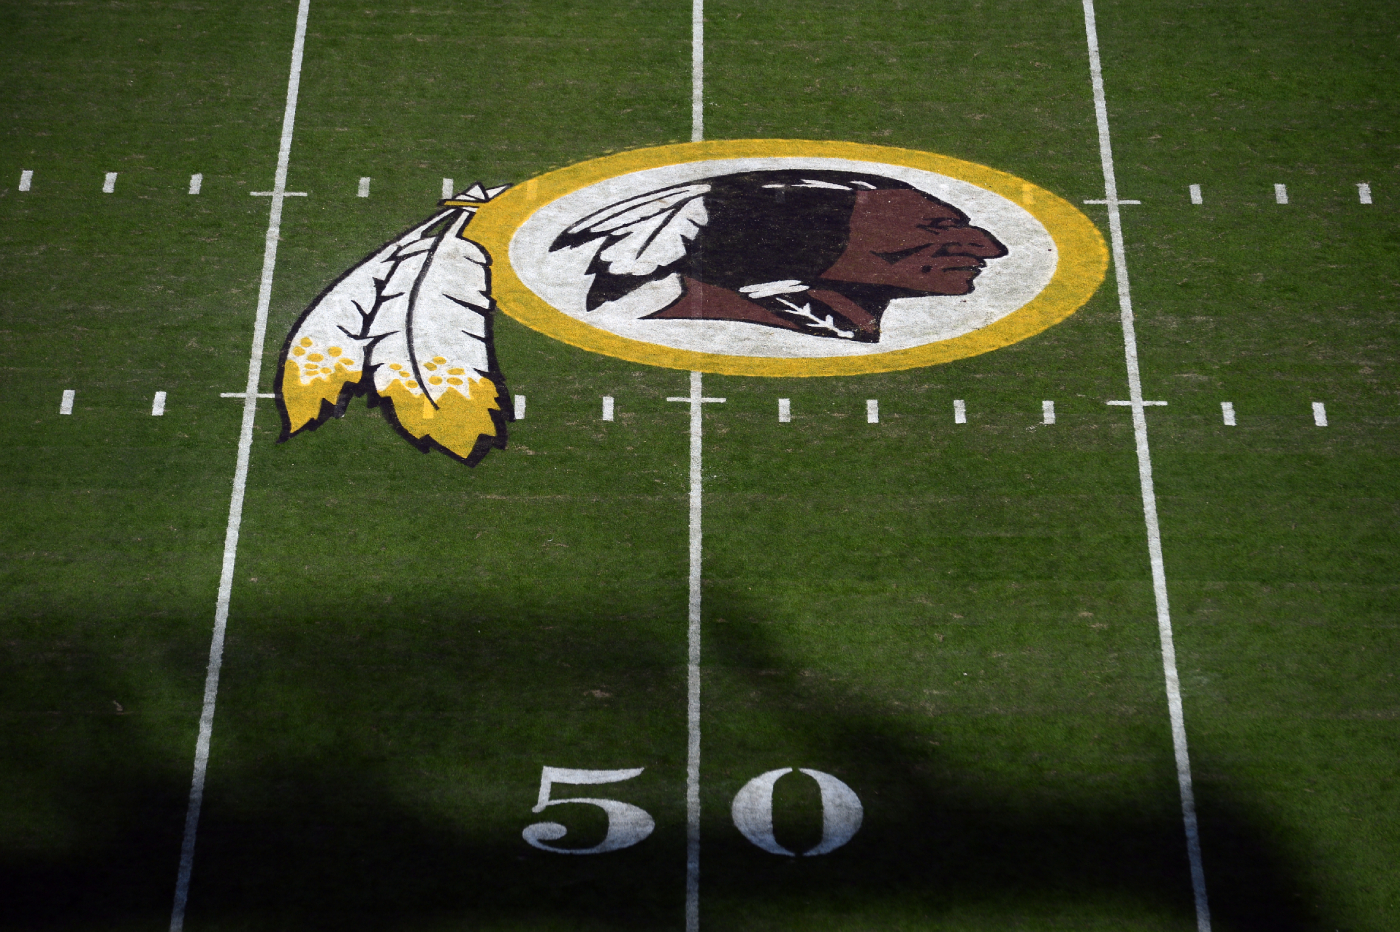 The Washington Redskins are going to change their controversial team name. They, however, could be running out of options for a new one.